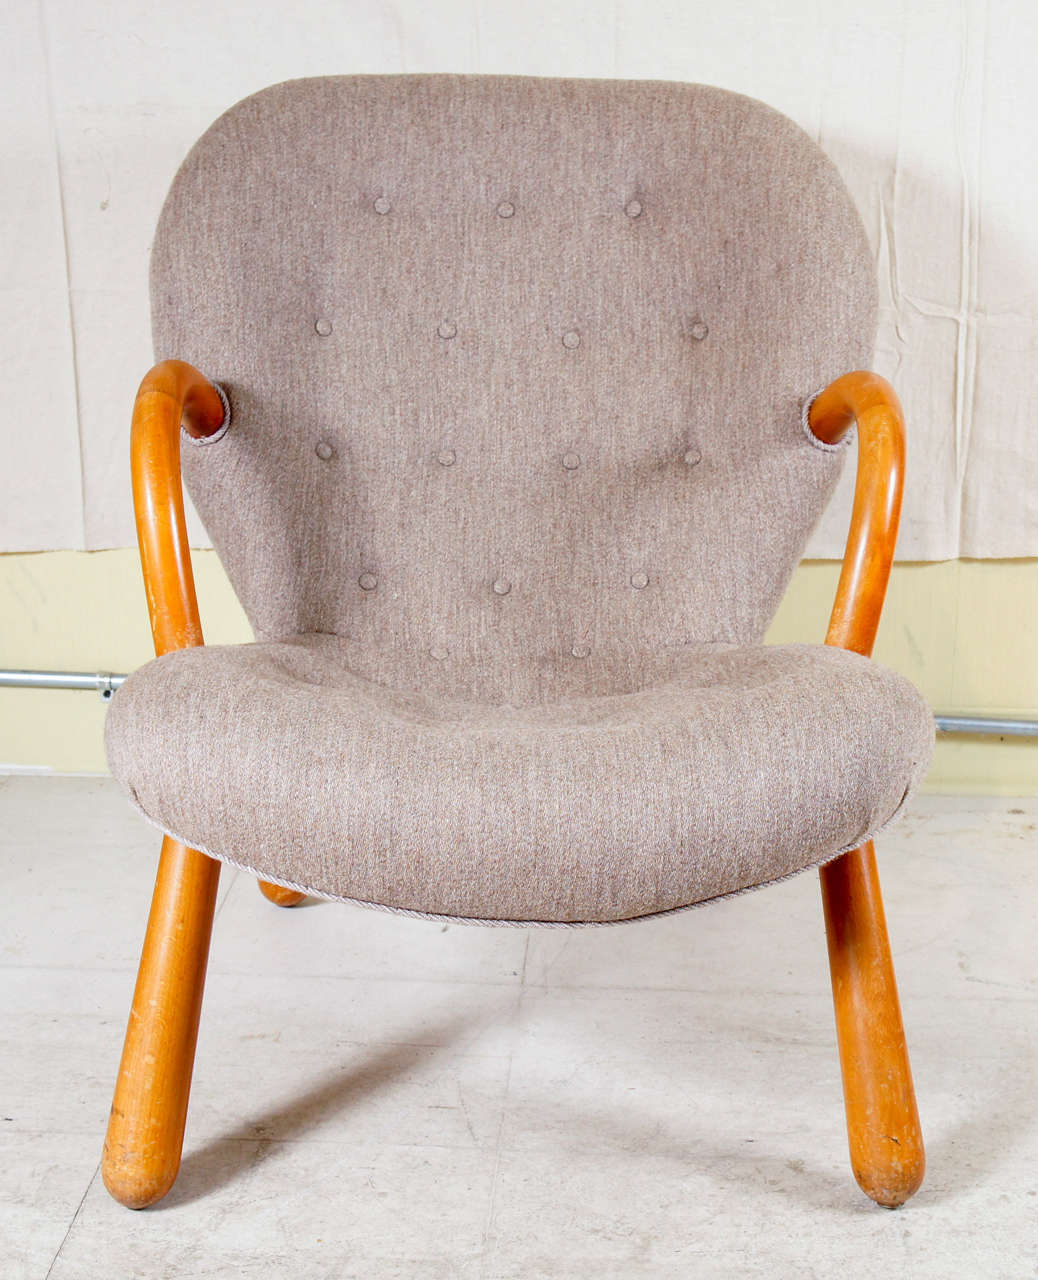 Mid-Century Modern armchair of some renown, by Danish architect, Philip Arctander, designed in 1944 for retail store NY Form A/S, in Copenhagen. Named the 'Muslingestole' or clam chair for its rounded shape, the arms and legs are in beech, and it is